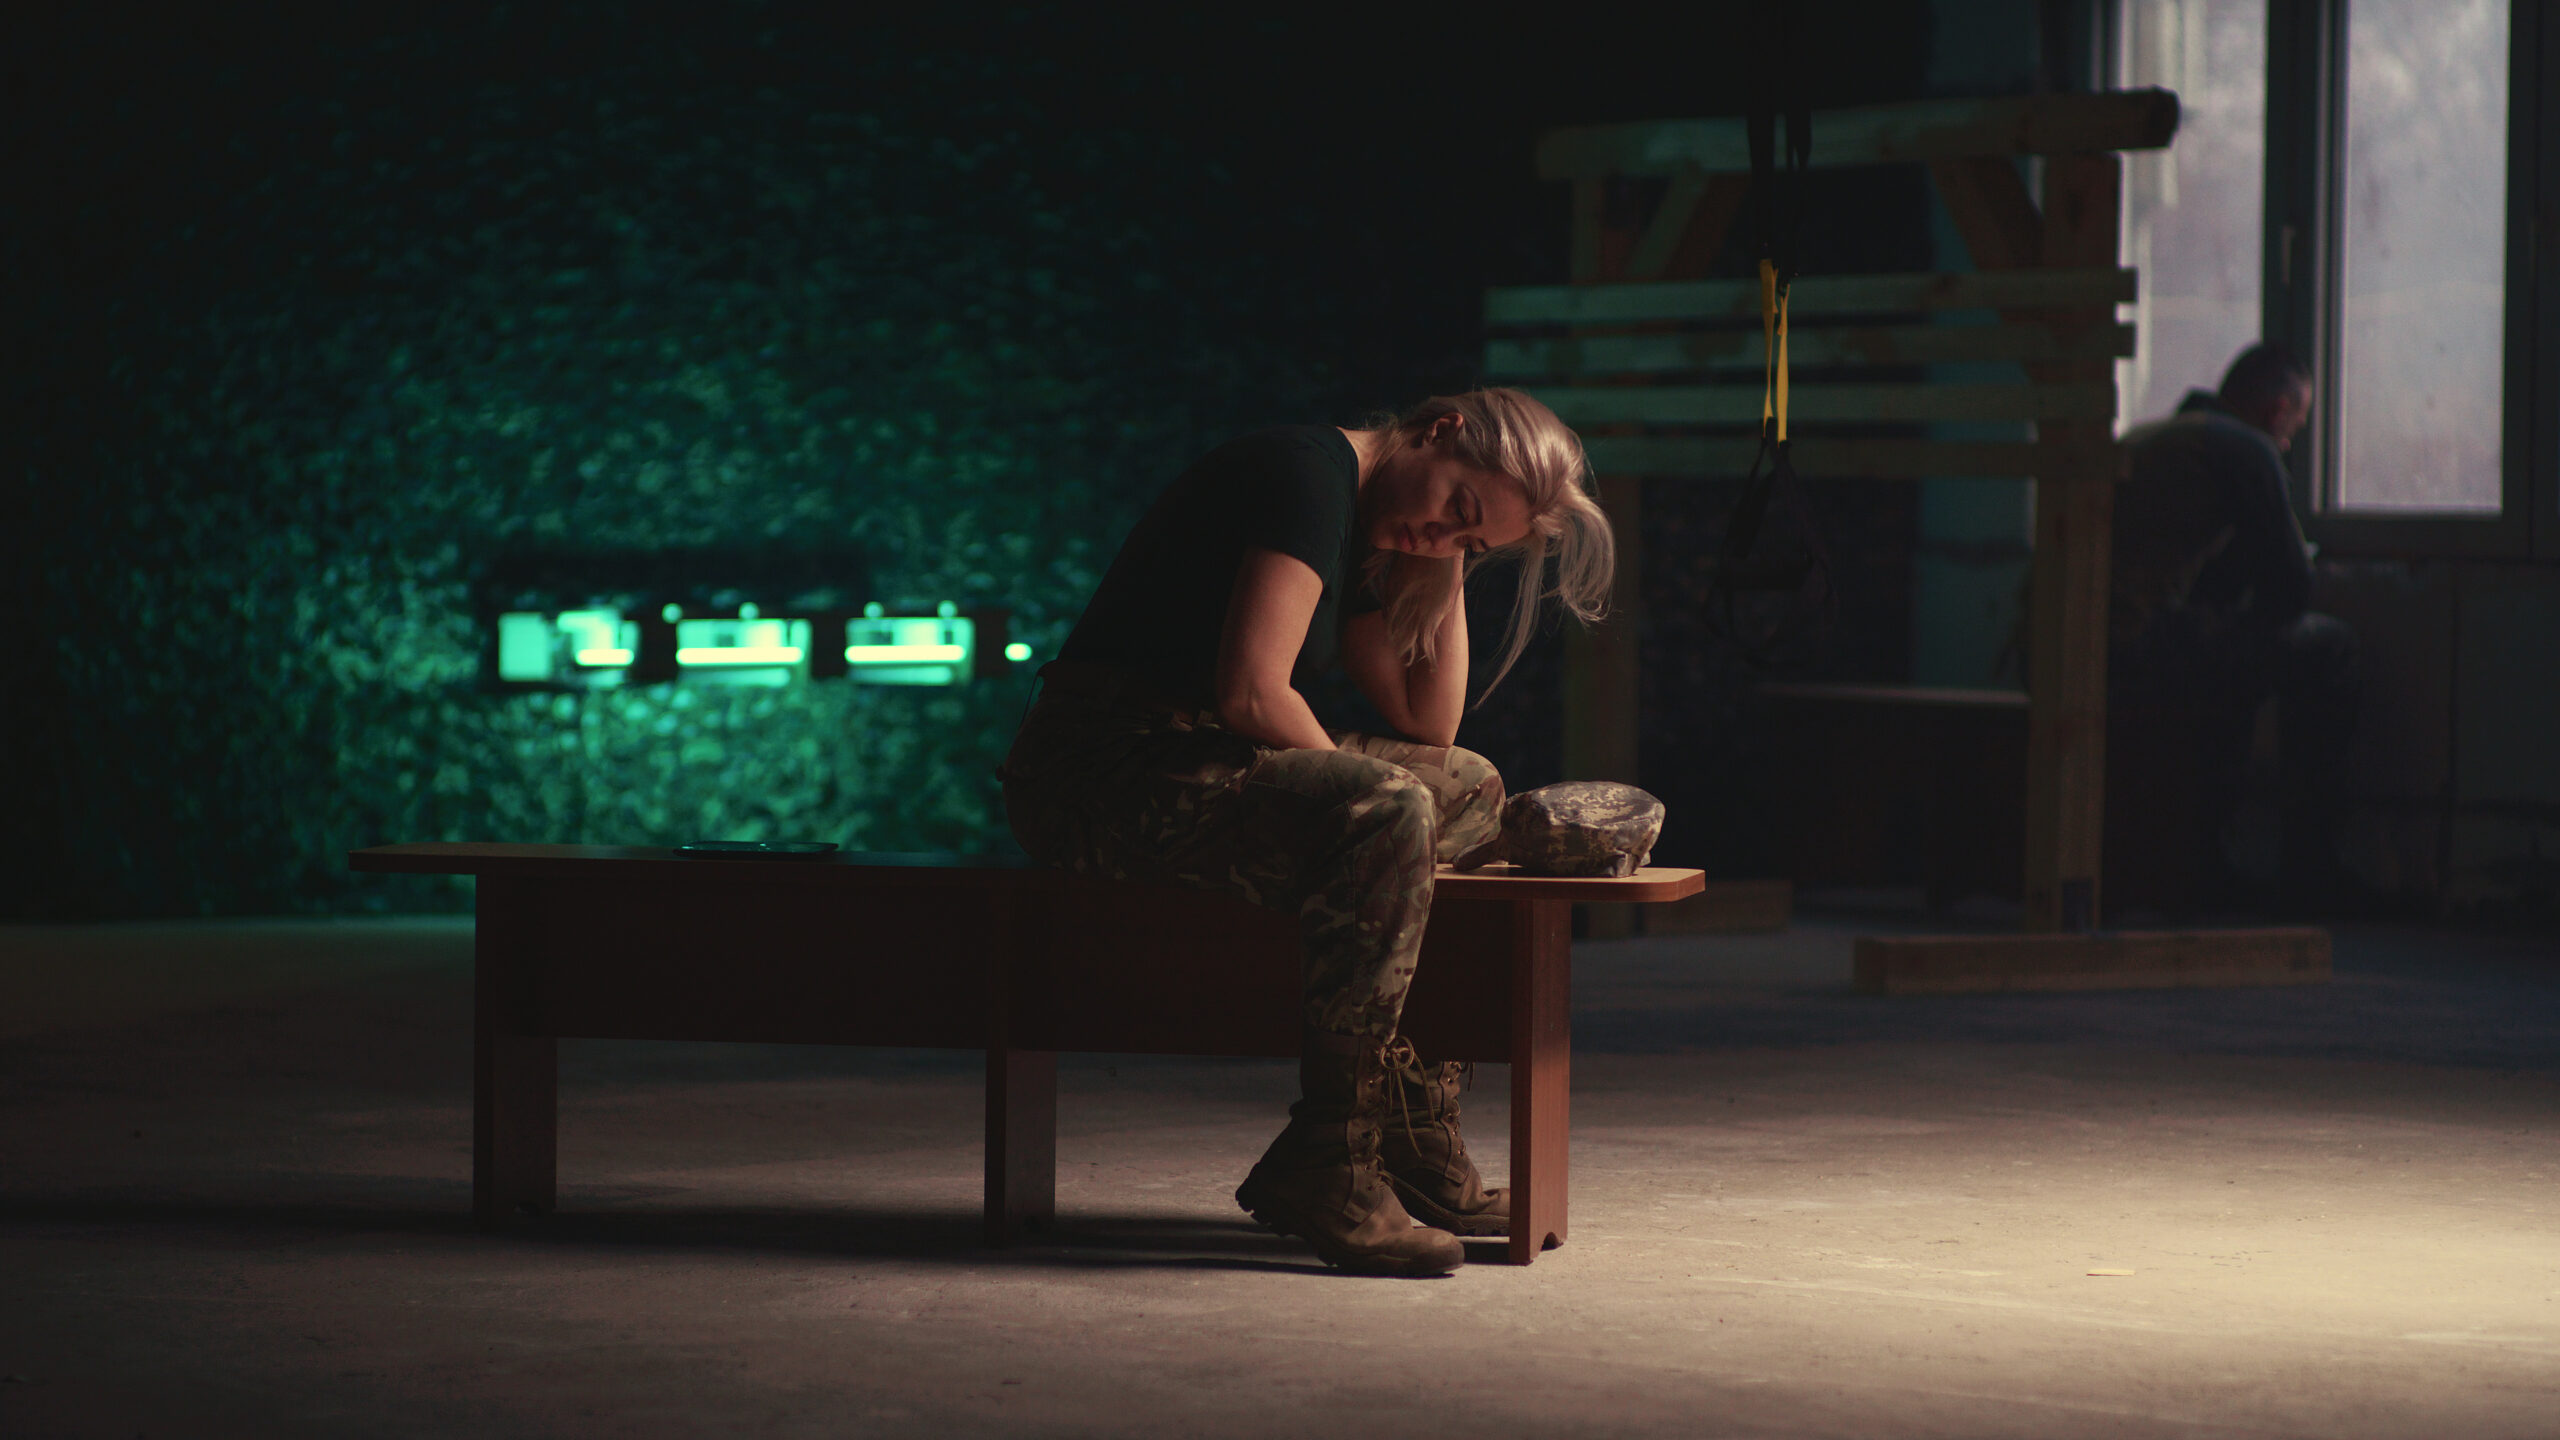 View of tired military woman taking off cap and touching hair while sitting on bench and relaxing in dark gym